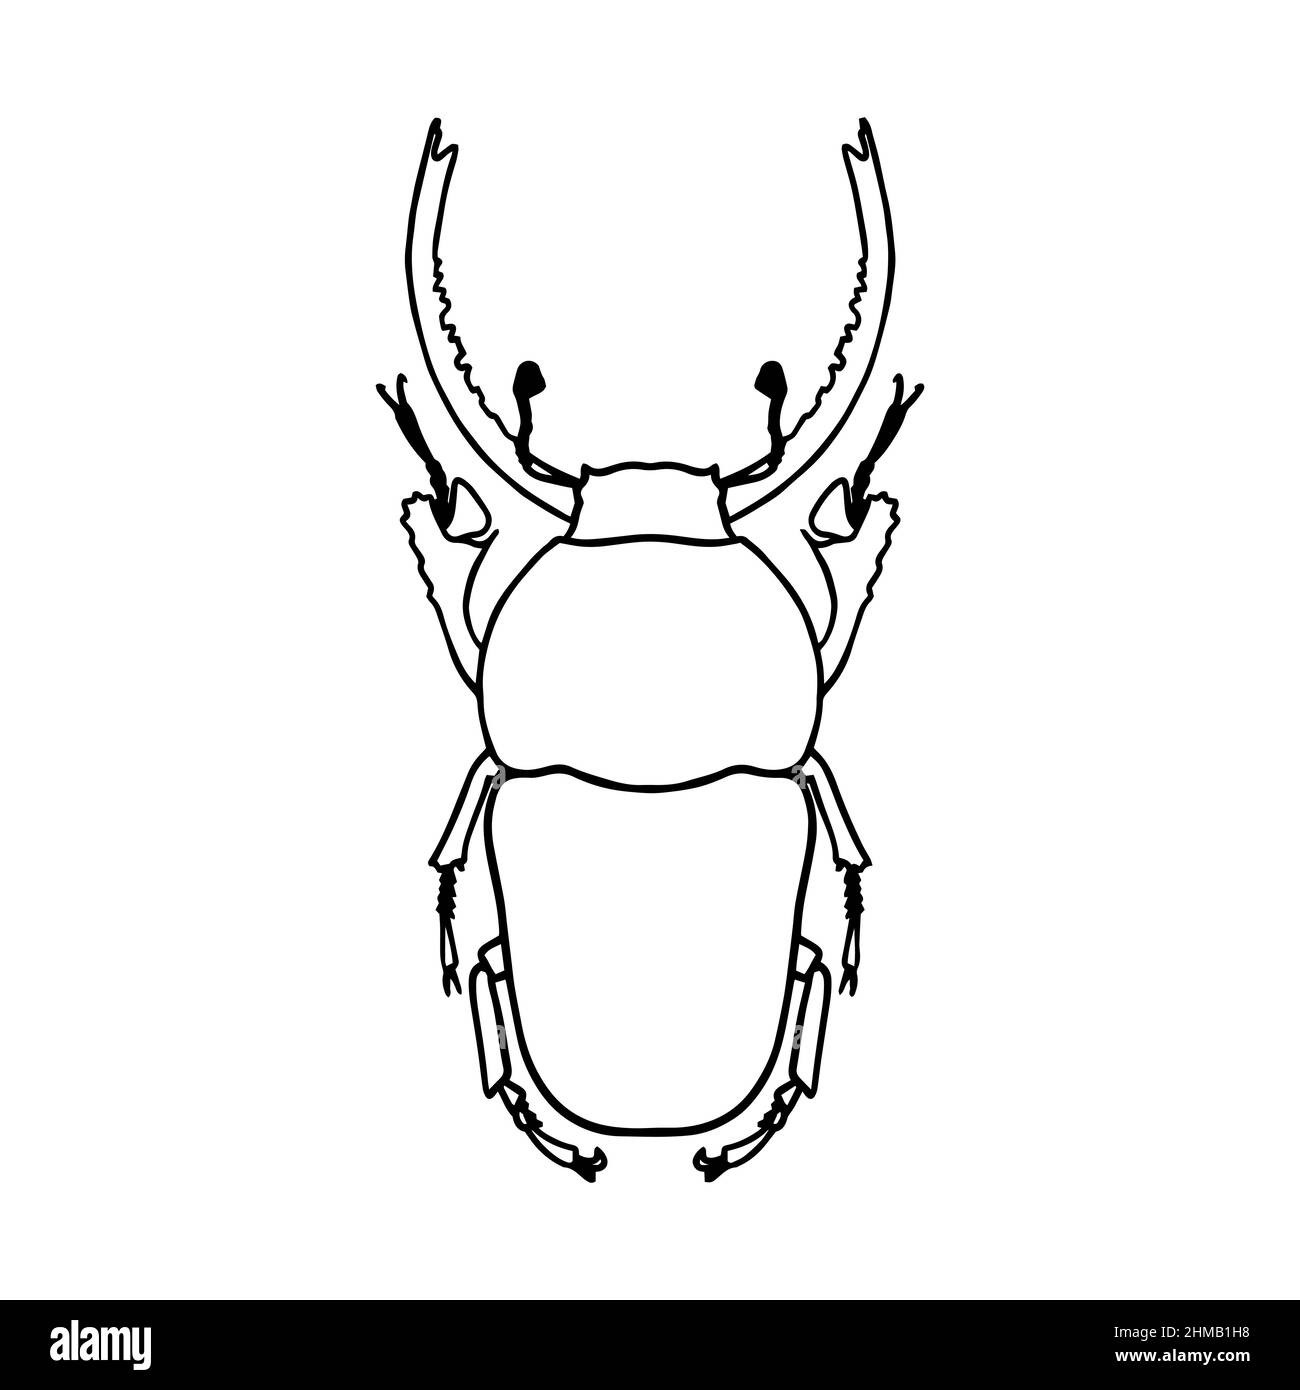 Isolated contour drawing of a beetle on a white background. Doodle style. A design element. Stock Vector